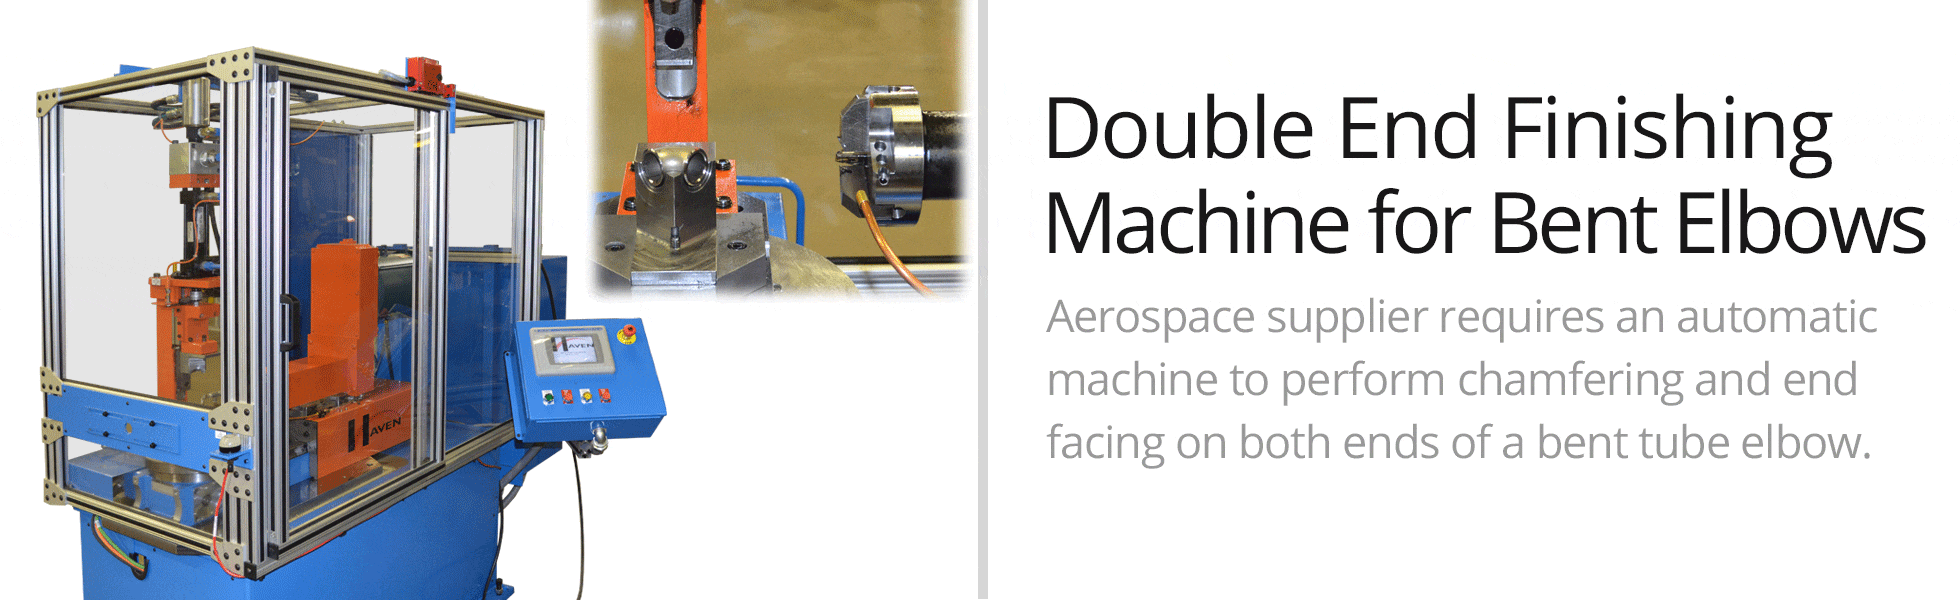 Special Double End Finishing Machine for Bent Elbows Video